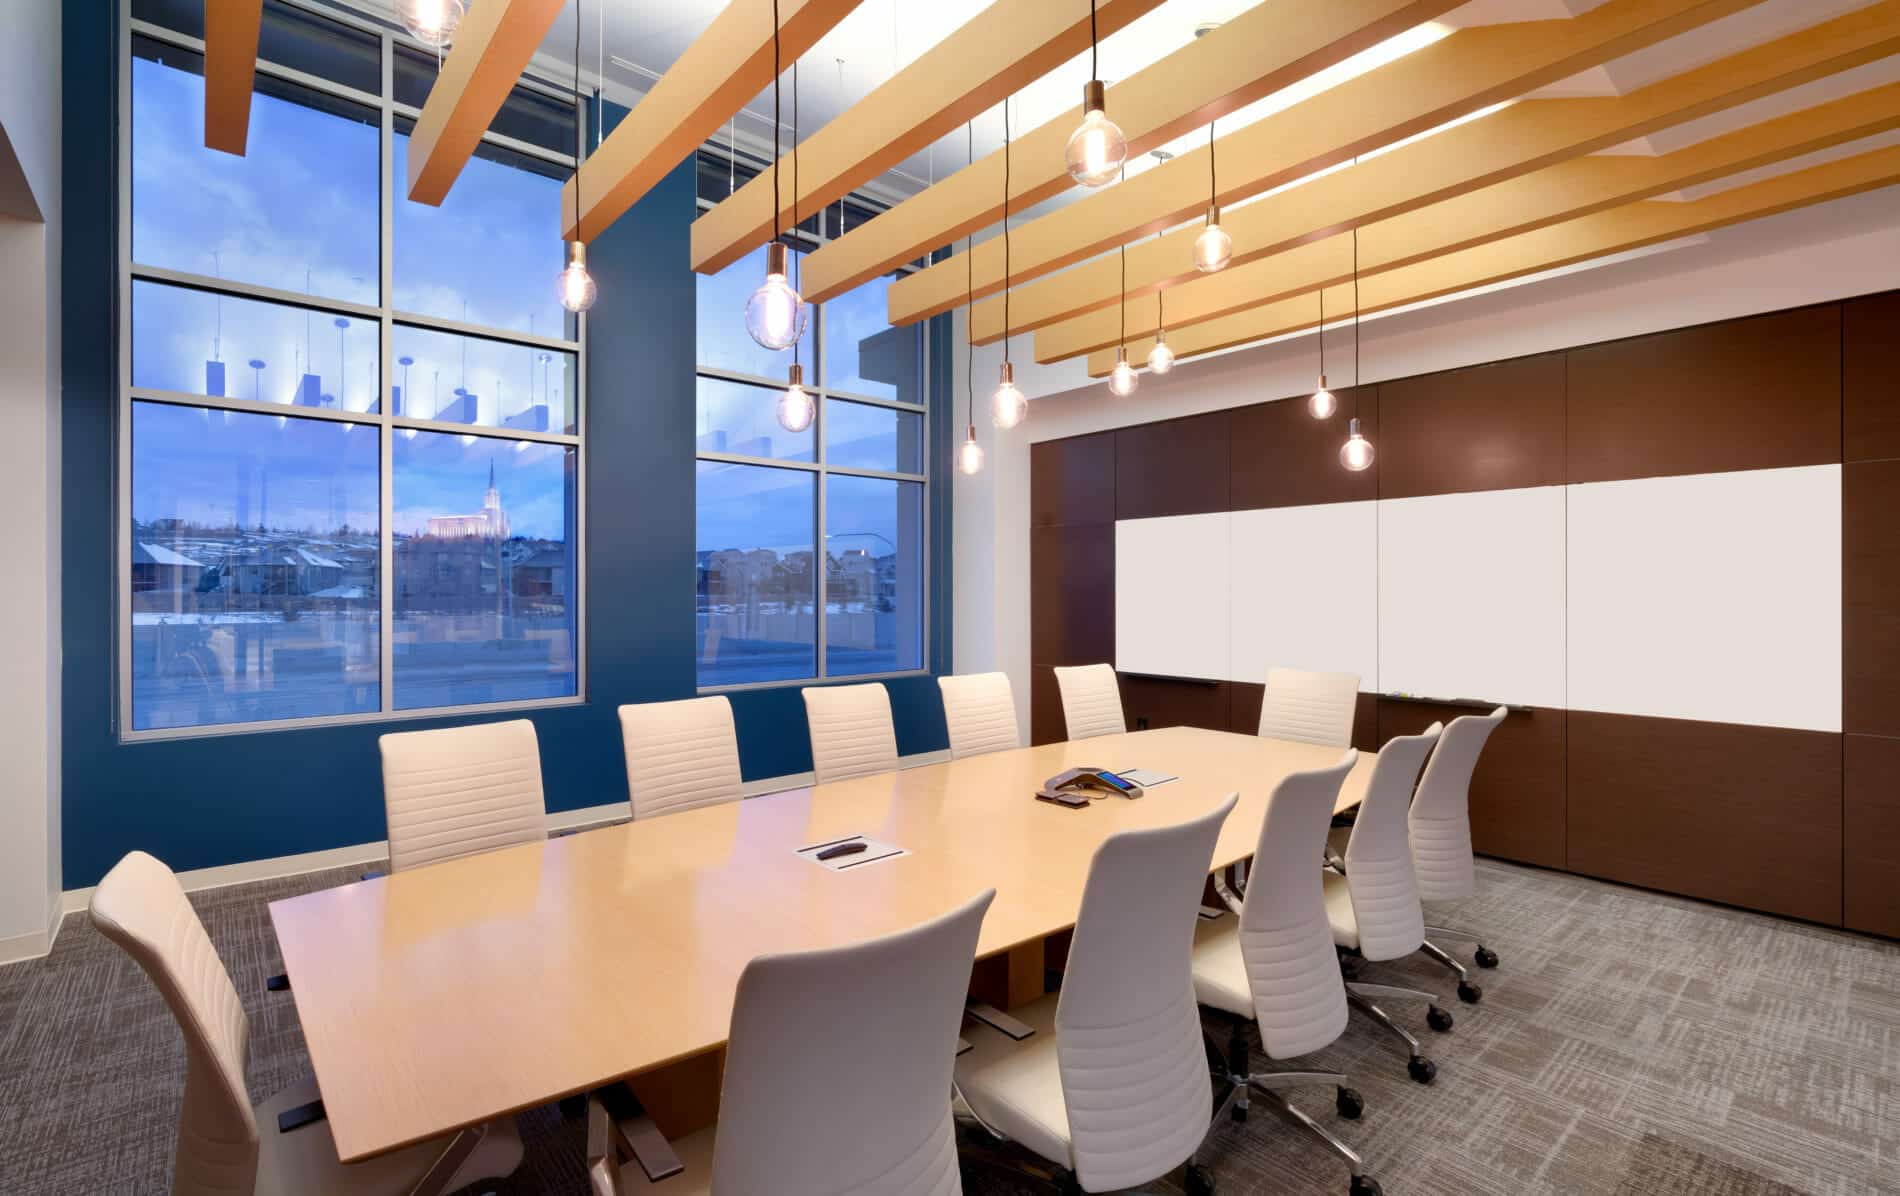 Board meeting room at Larson & Company Office in South Jordan, UT | Utah Interior design project | Think Architecture